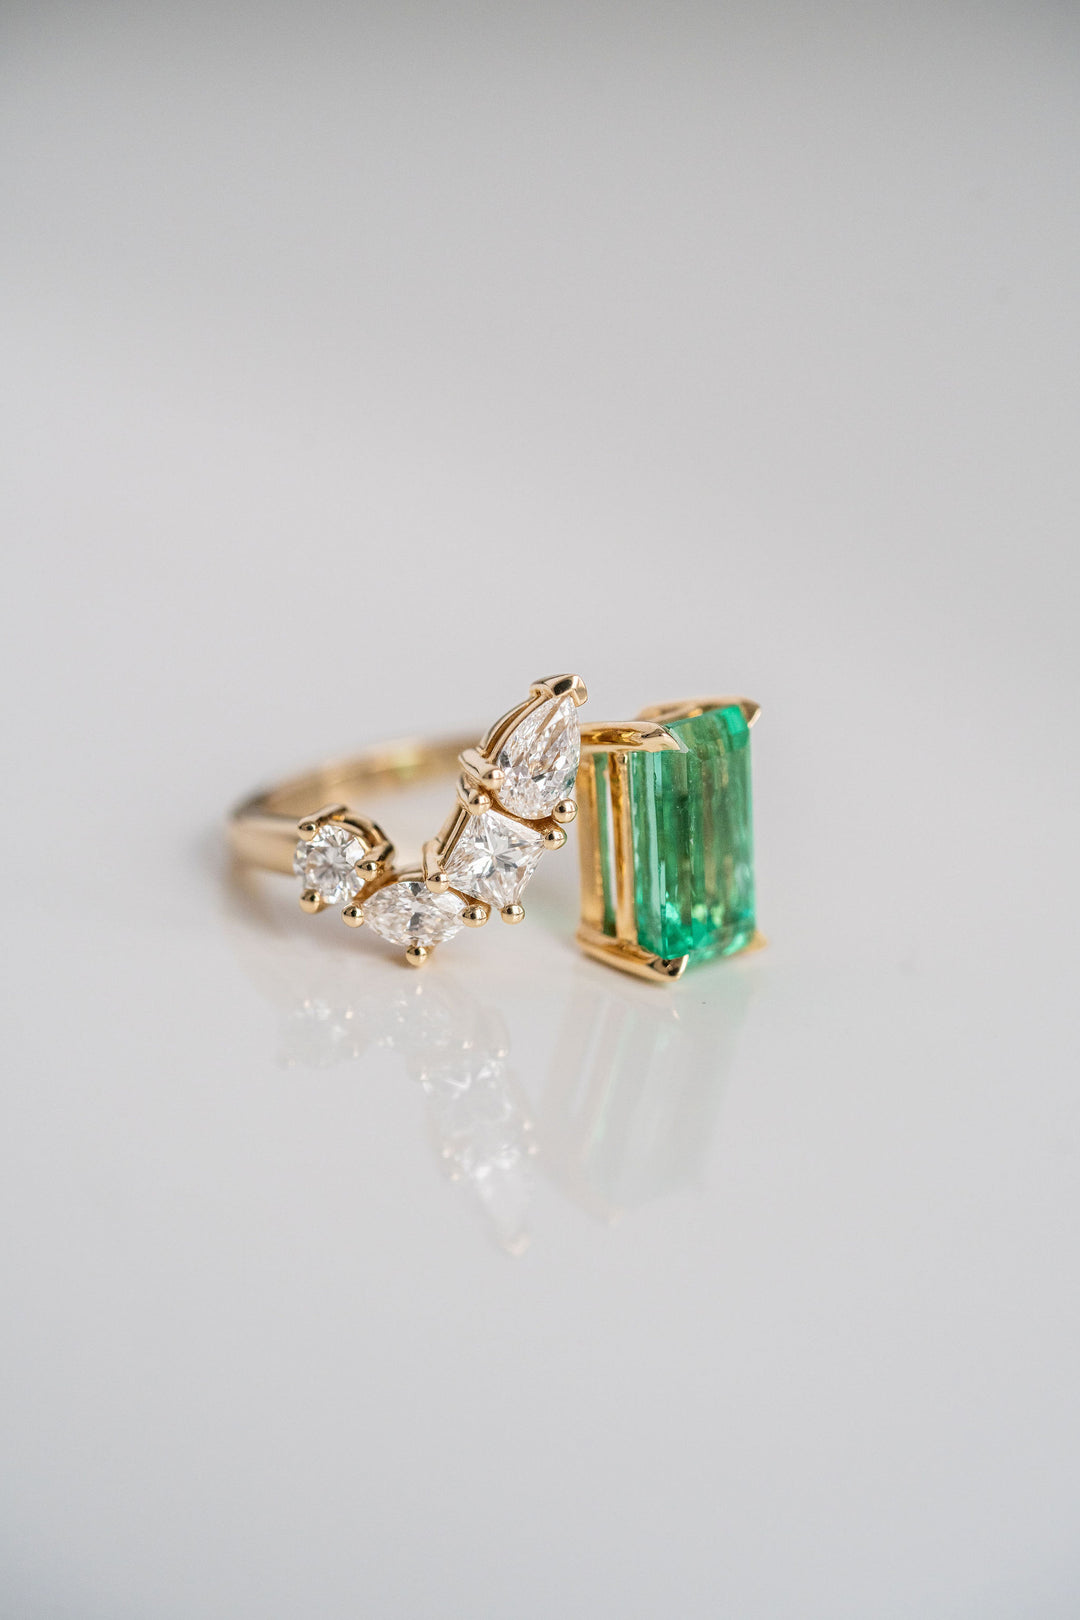 2.65ct. Emerald Cut Colombian Emerald Gap Style Cocktail Ring With Diamonds, 14k Yellow Gold 